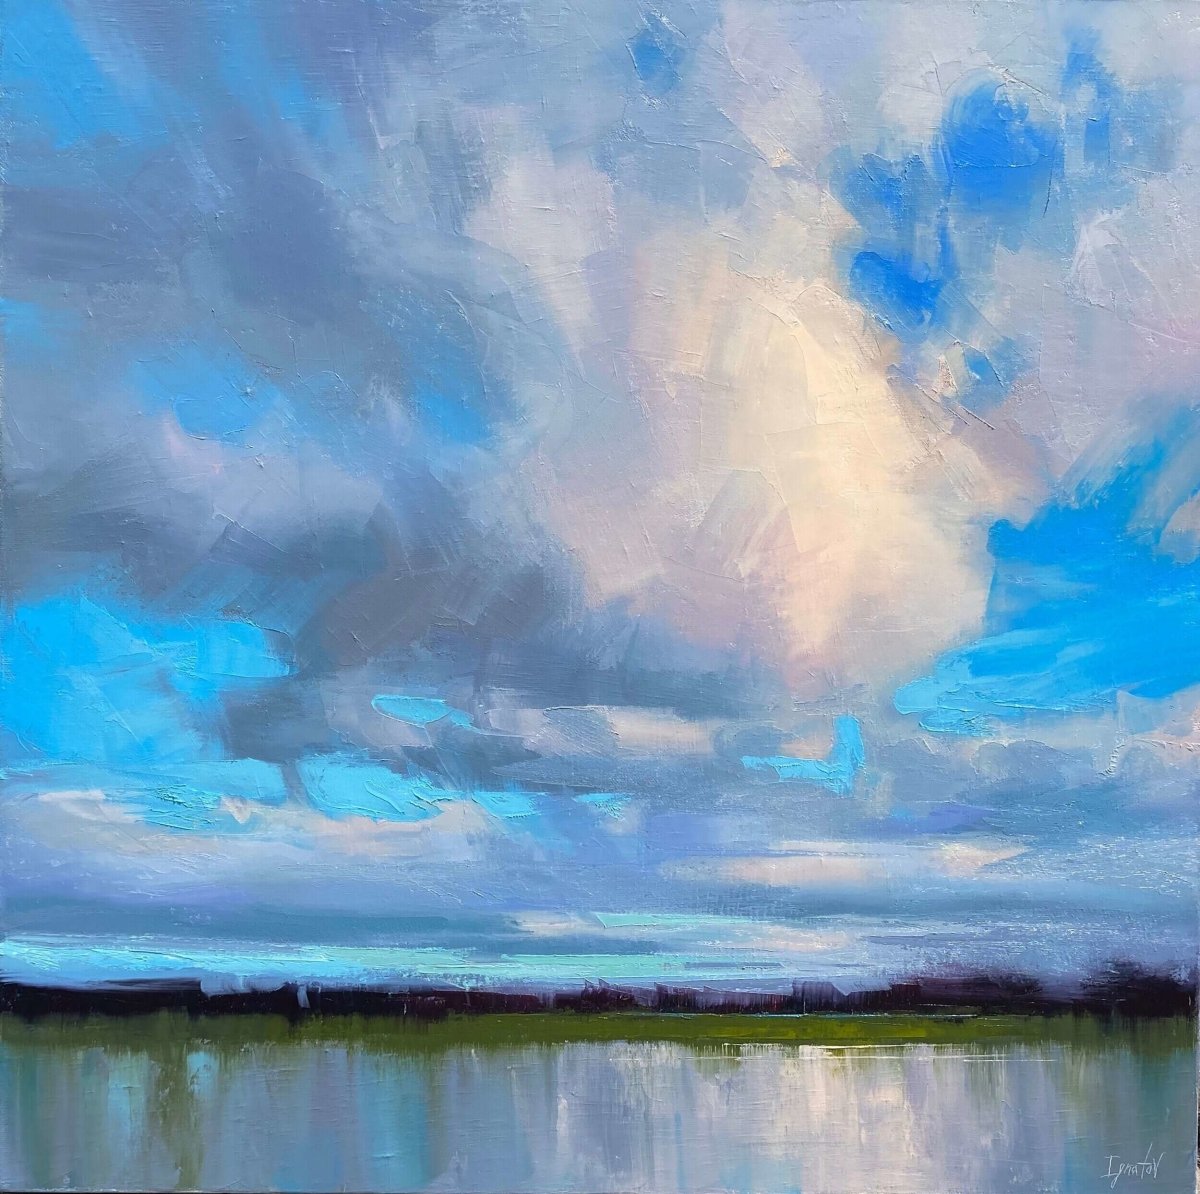 Sunlit Clouds by Ignat Ignatov at LePrince Galleries